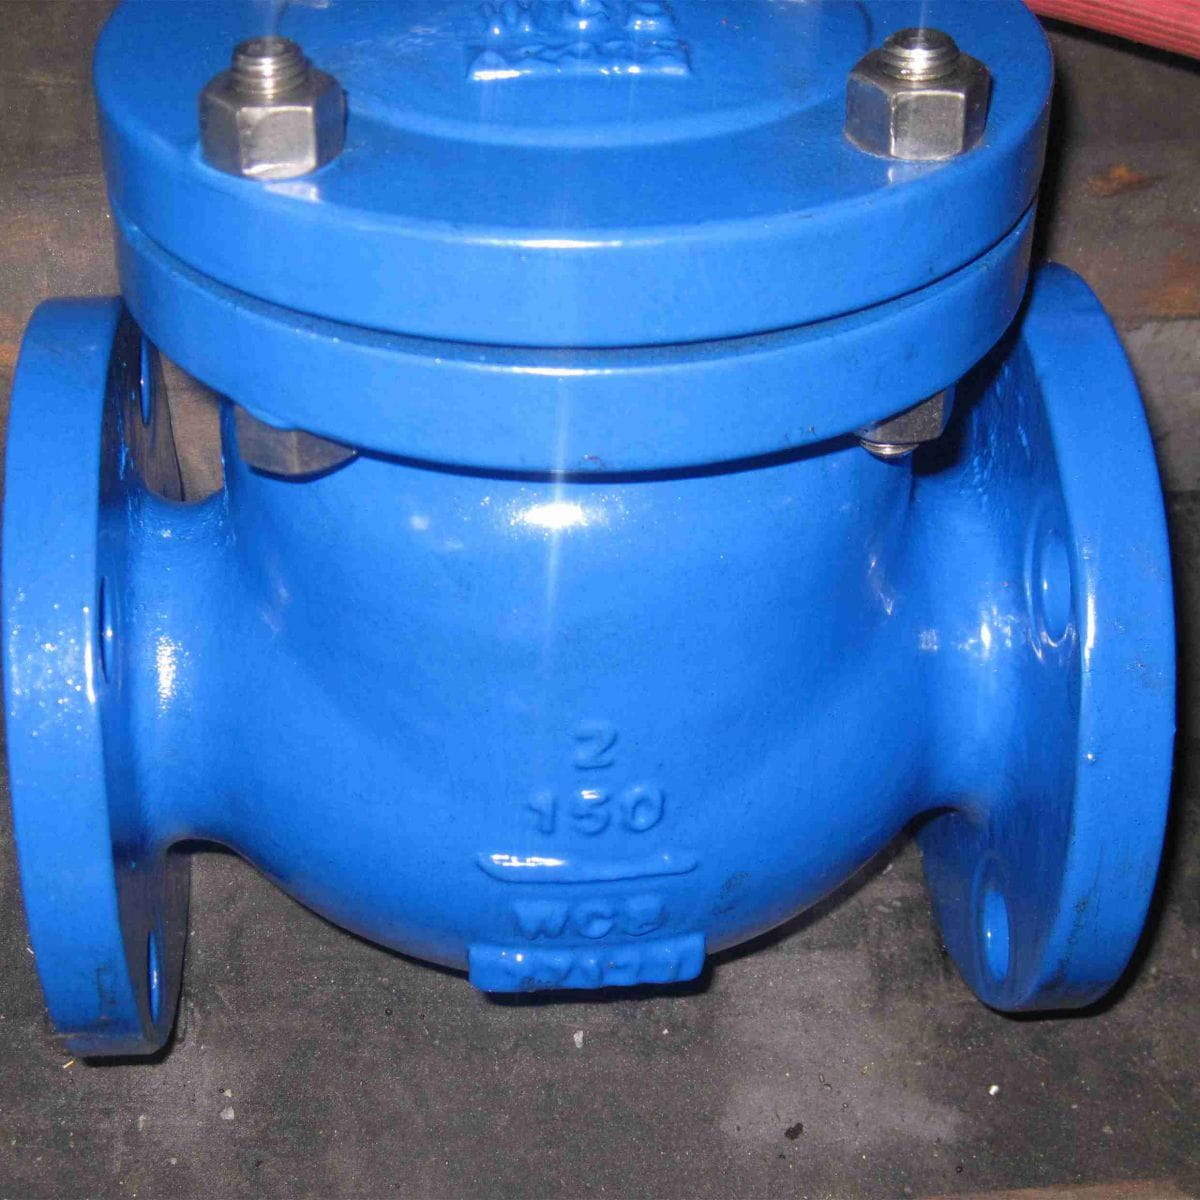 Bolted Bonnet Swing Check Valve, 2 Inch, 150 LB, A216 WCB